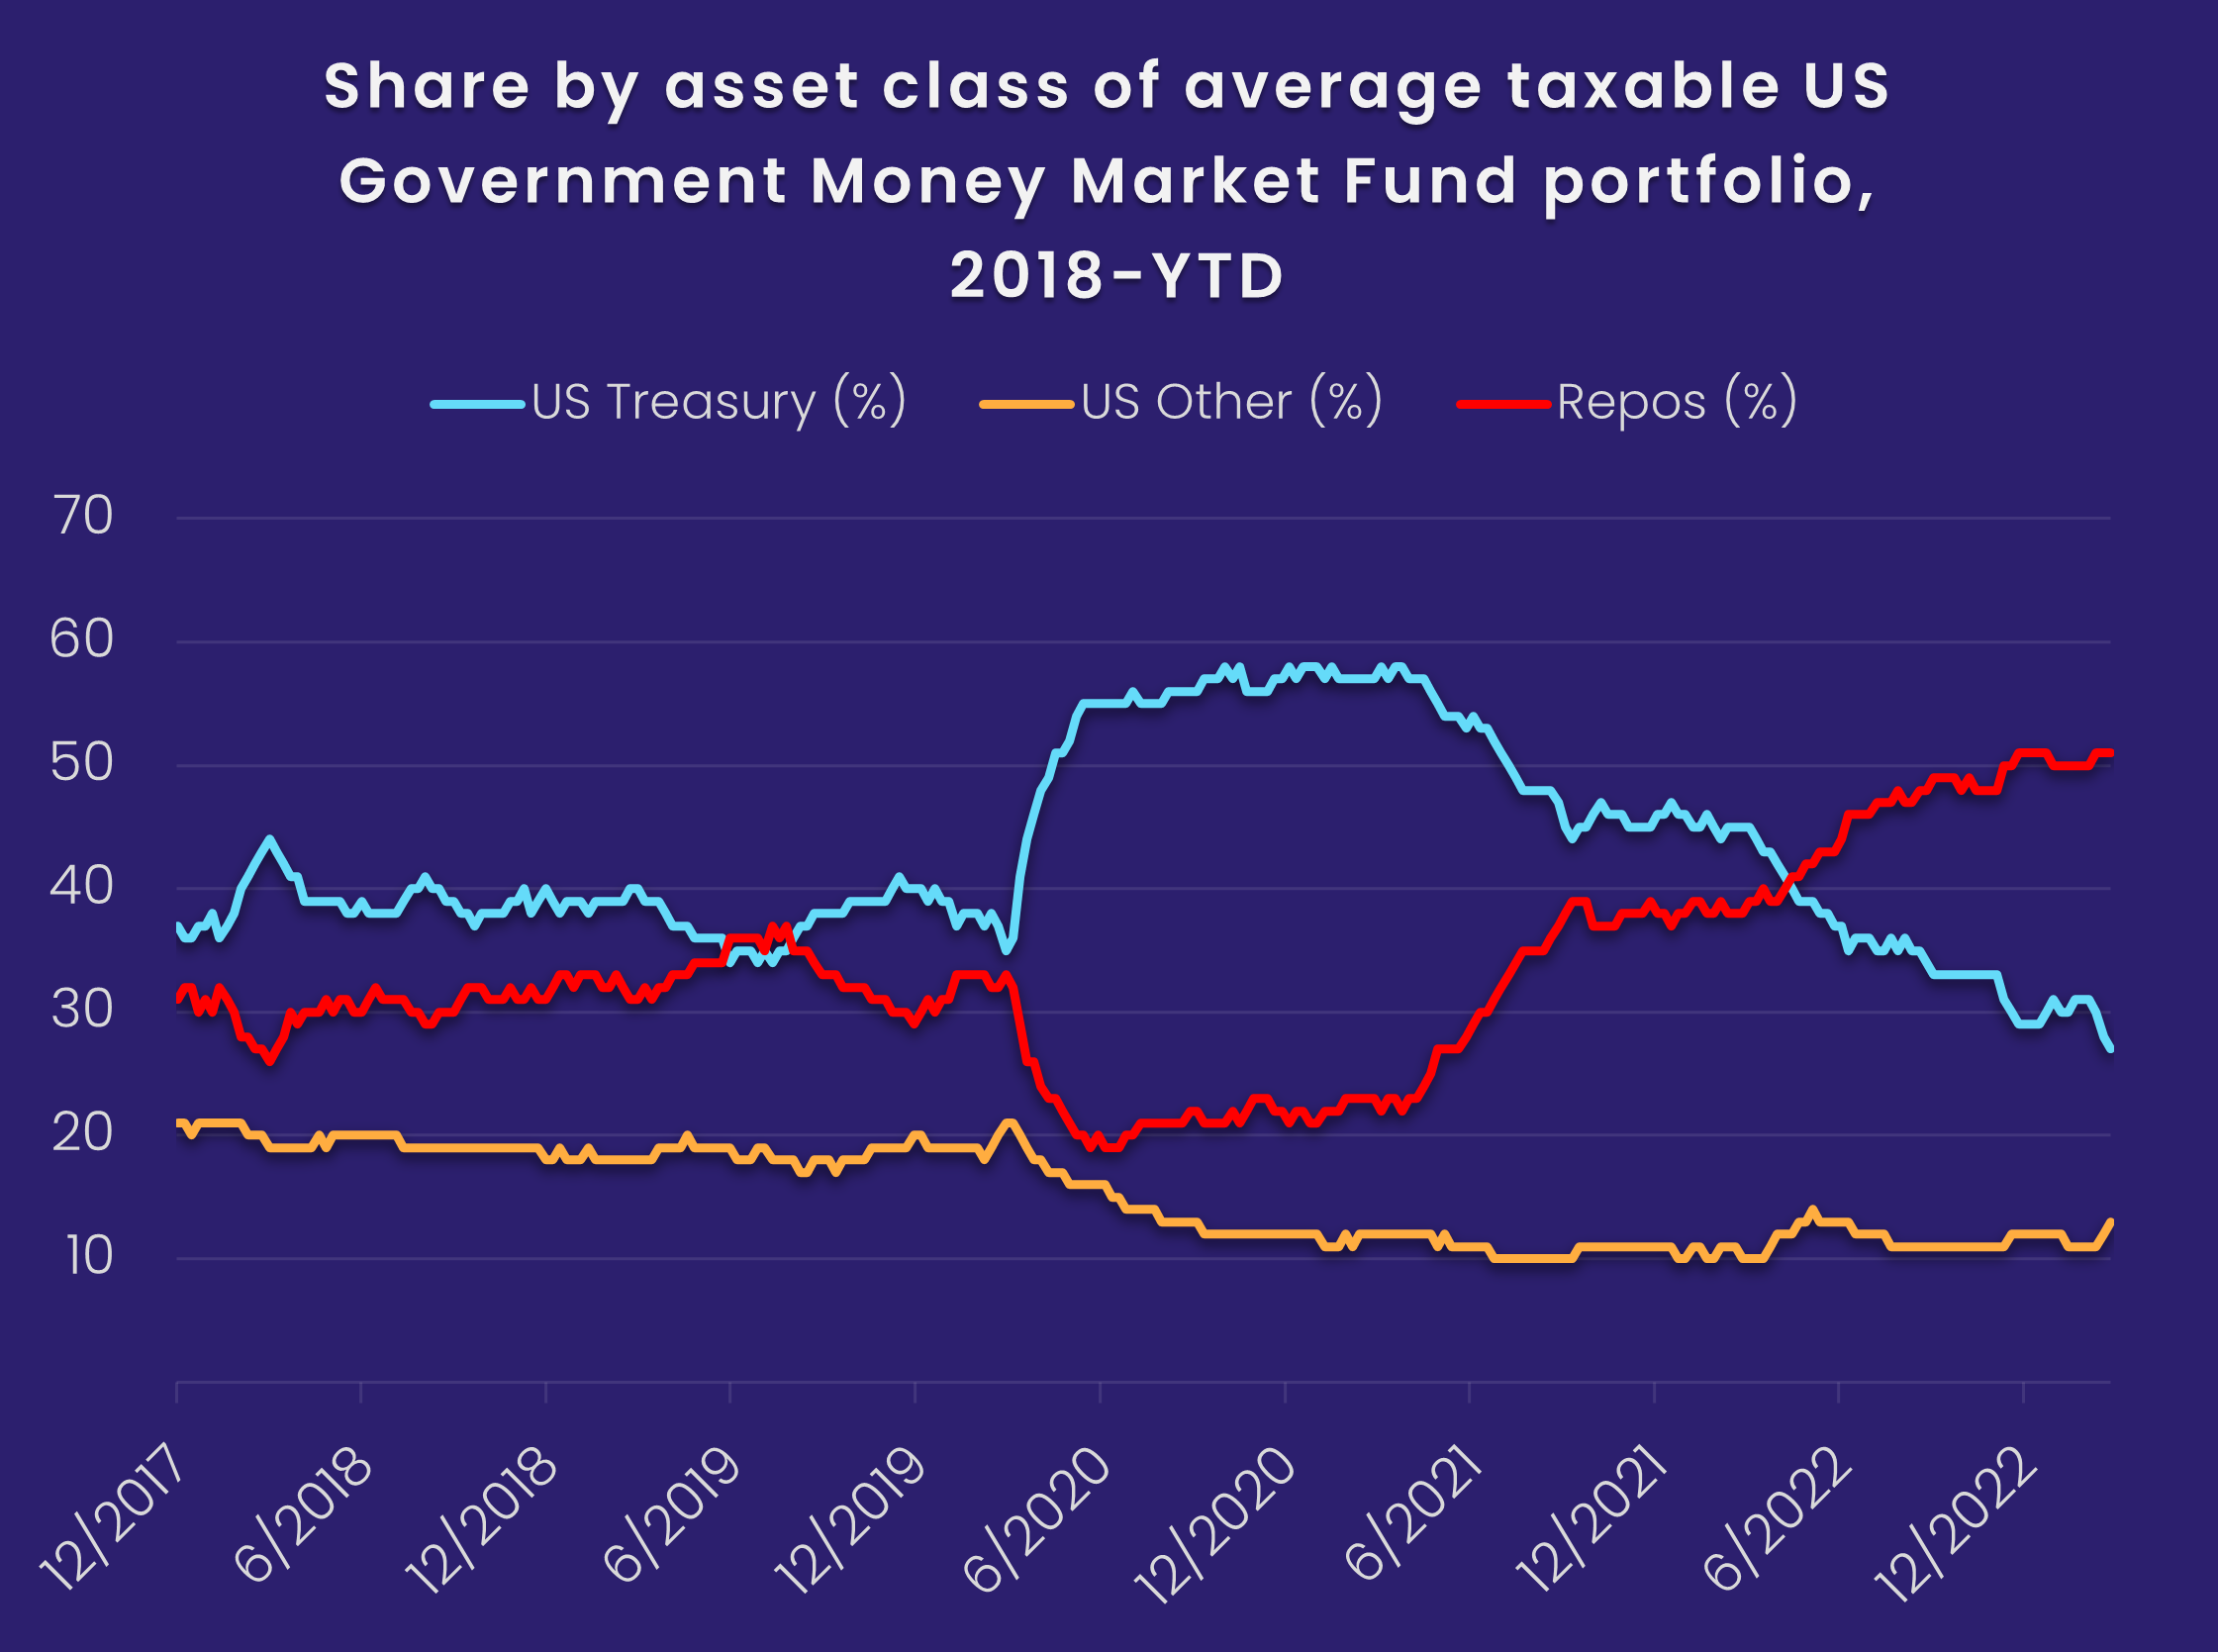 Chart representing 'Share by asset class of average taxable US Government Money Market Fund portfolio, 2018-year-to-date'